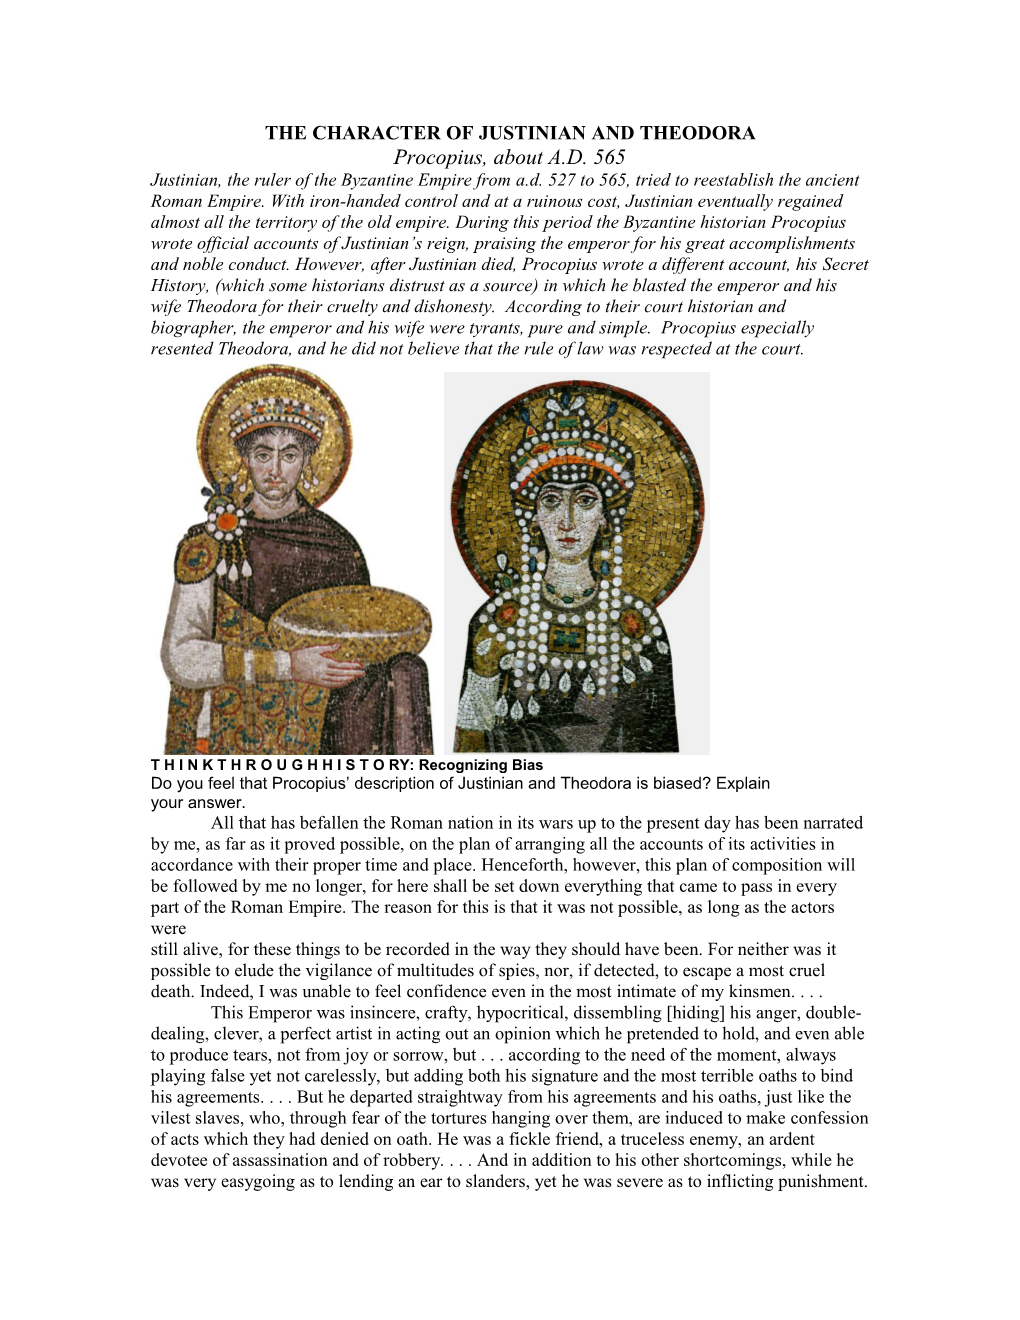 The Character of Justinian and Theodora